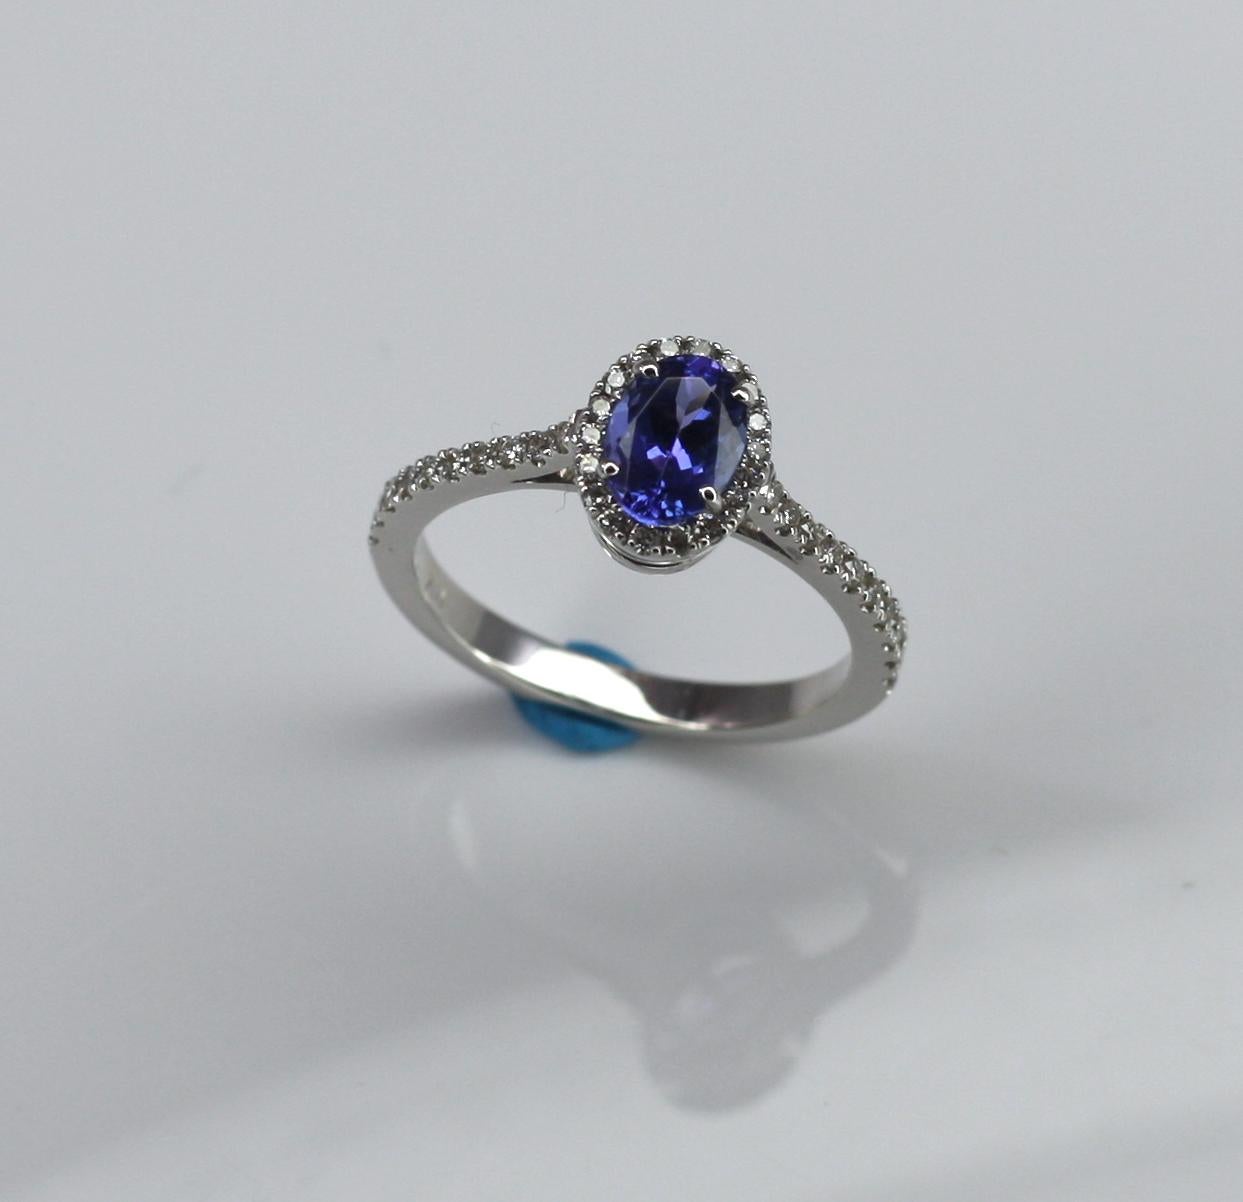 S.Georgios designer Ring is all hand-made in White Gold 18 Karat. This beautiful band features a solitaire cushion cut natural Tanzanite the weight 1.22 Carat and natural white brilliant cut diamonds total weight of 0.27 Carat. The gorgeous and